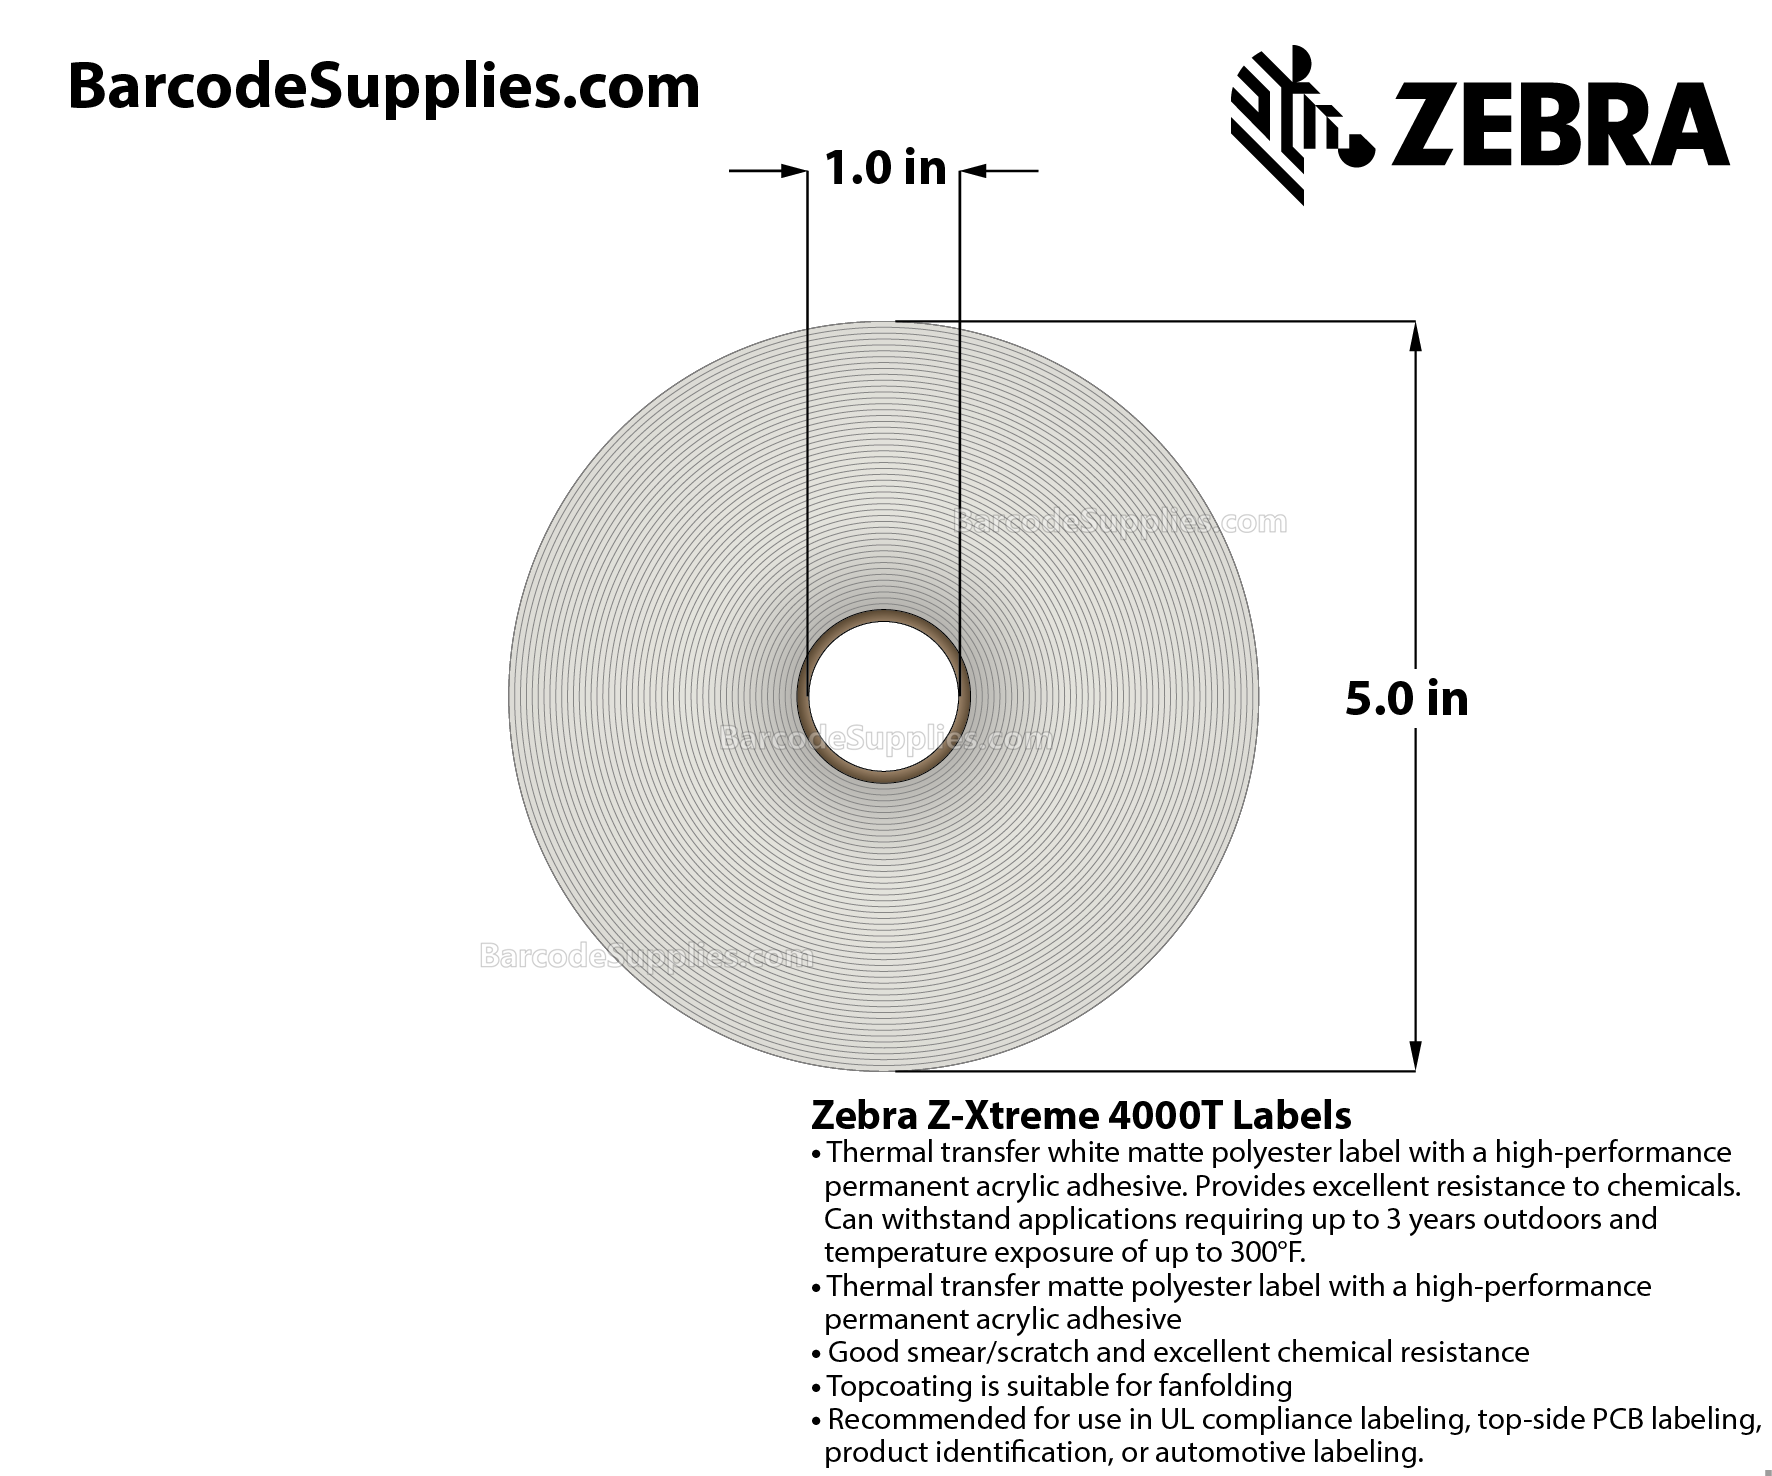 1 x 0.5 Thermal Transfer White Z-Xtreme 4000T White Labels With Permanent Adhesive - Perforated - 3000 Labels Per Roll - Carton Of 1 Rolls - 3000 Labels Total - MPN: 10023341